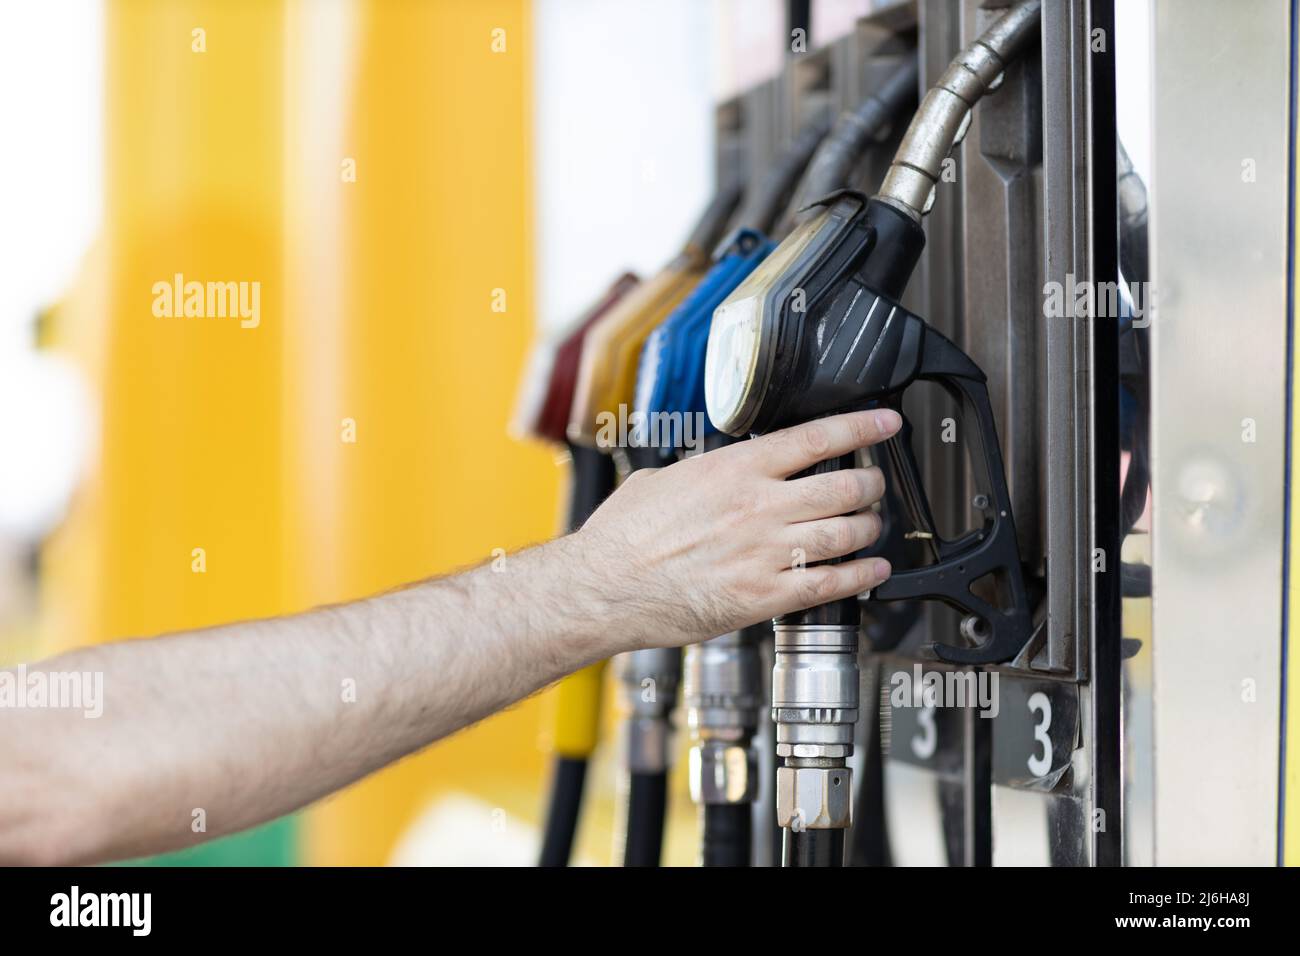 Man holding filling gun in his hand at gas station. Stock Photo